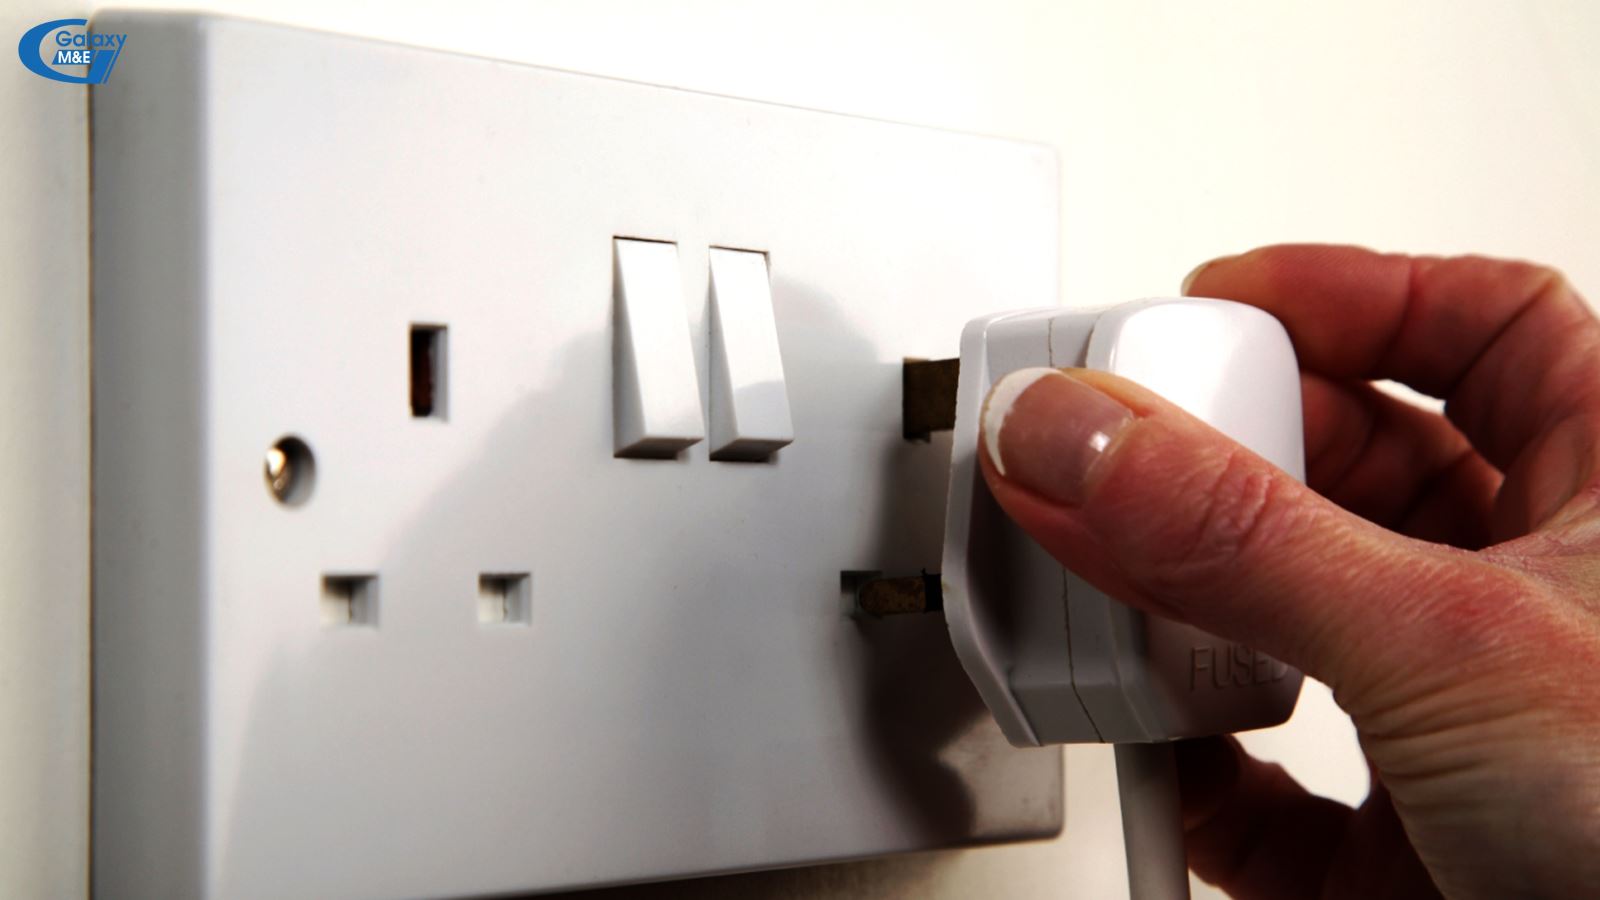 Families with young children should use pluggable sockets to prevent electrical accidents from occurring in the family.